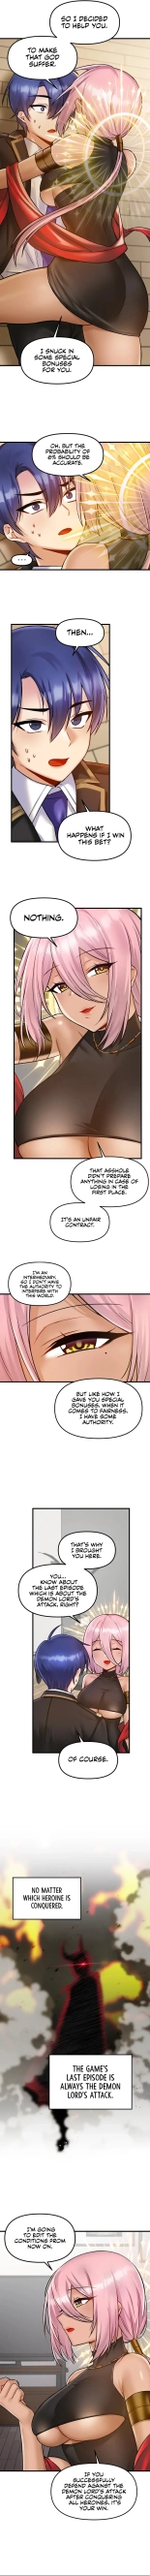 Trapped in the Academy's Eroge : página 278